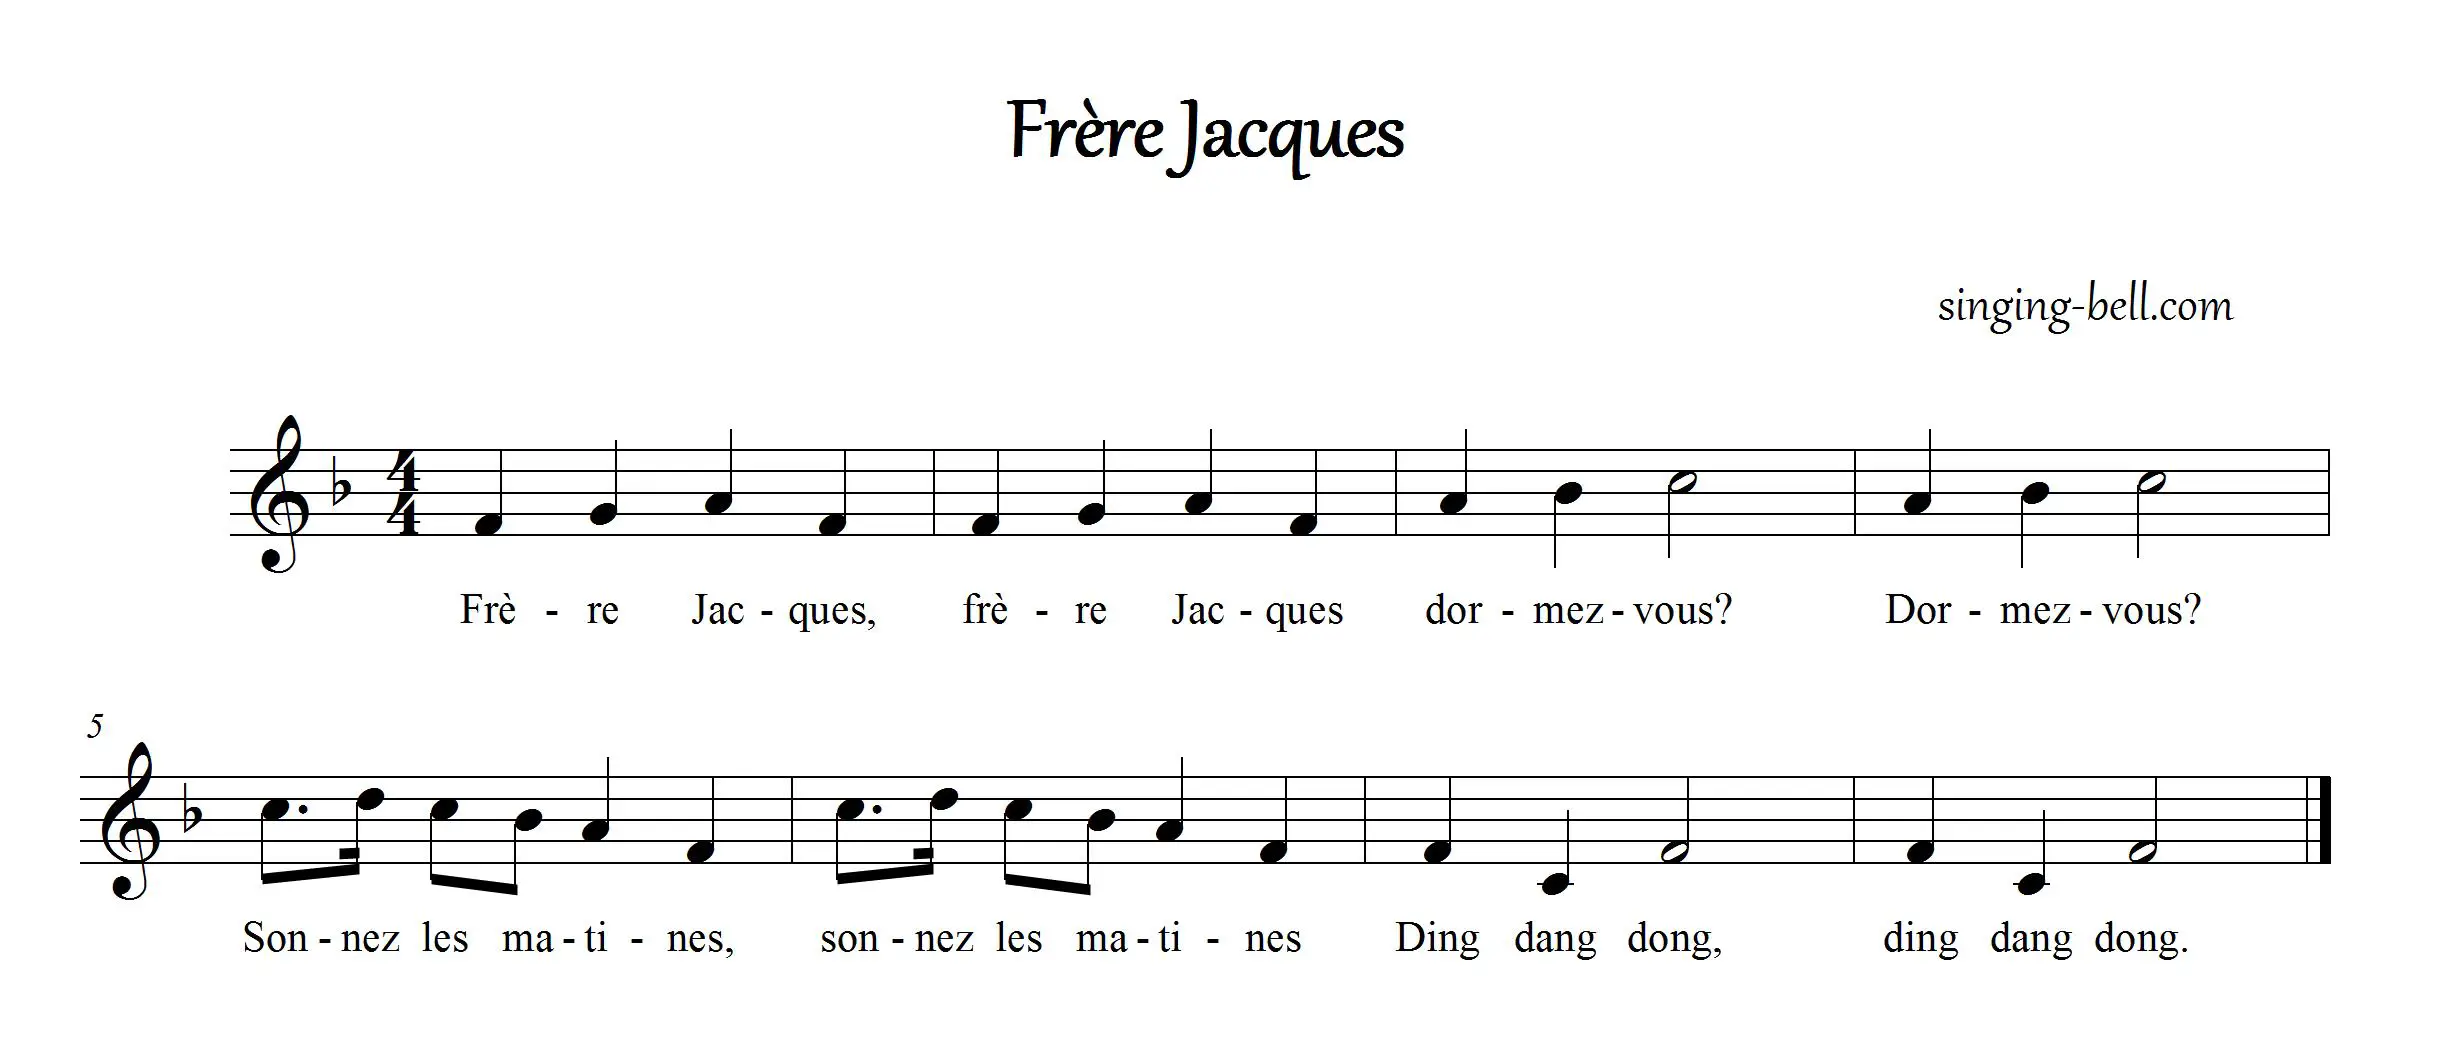 “Frère Jacques” Music Score / sheet music in F